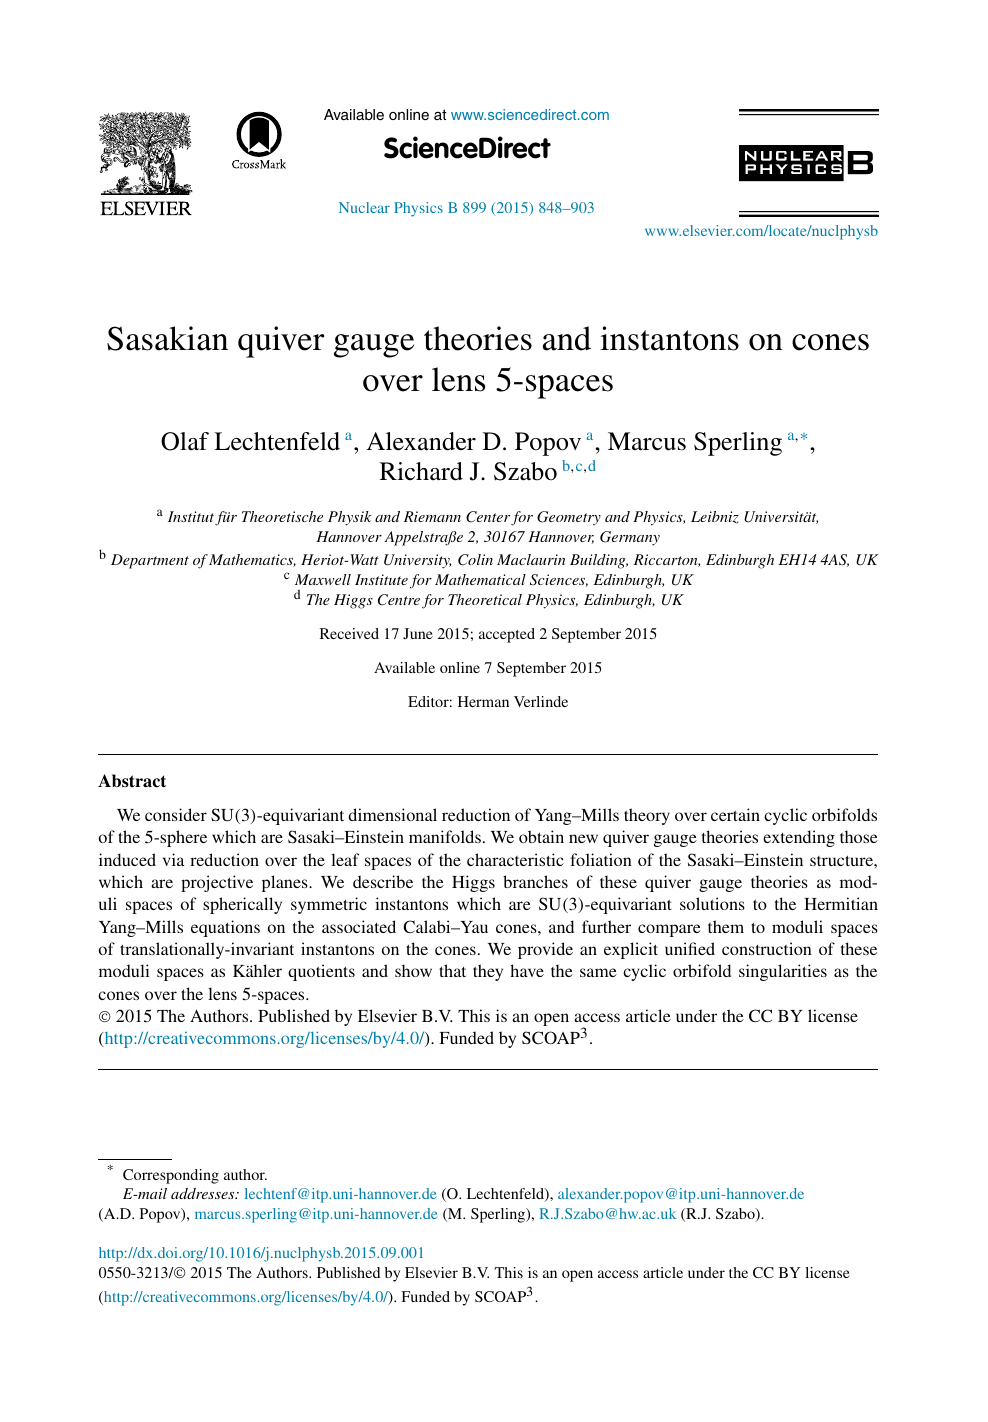 Sasakian Quiver Gauge Theories And Instantons On Cones Over Lens 5 Spaces Topic Of Research Paper In Physical Sciences Download Scholarly Article Pdf And Read For Free On Cyberleninka Open Science Hub